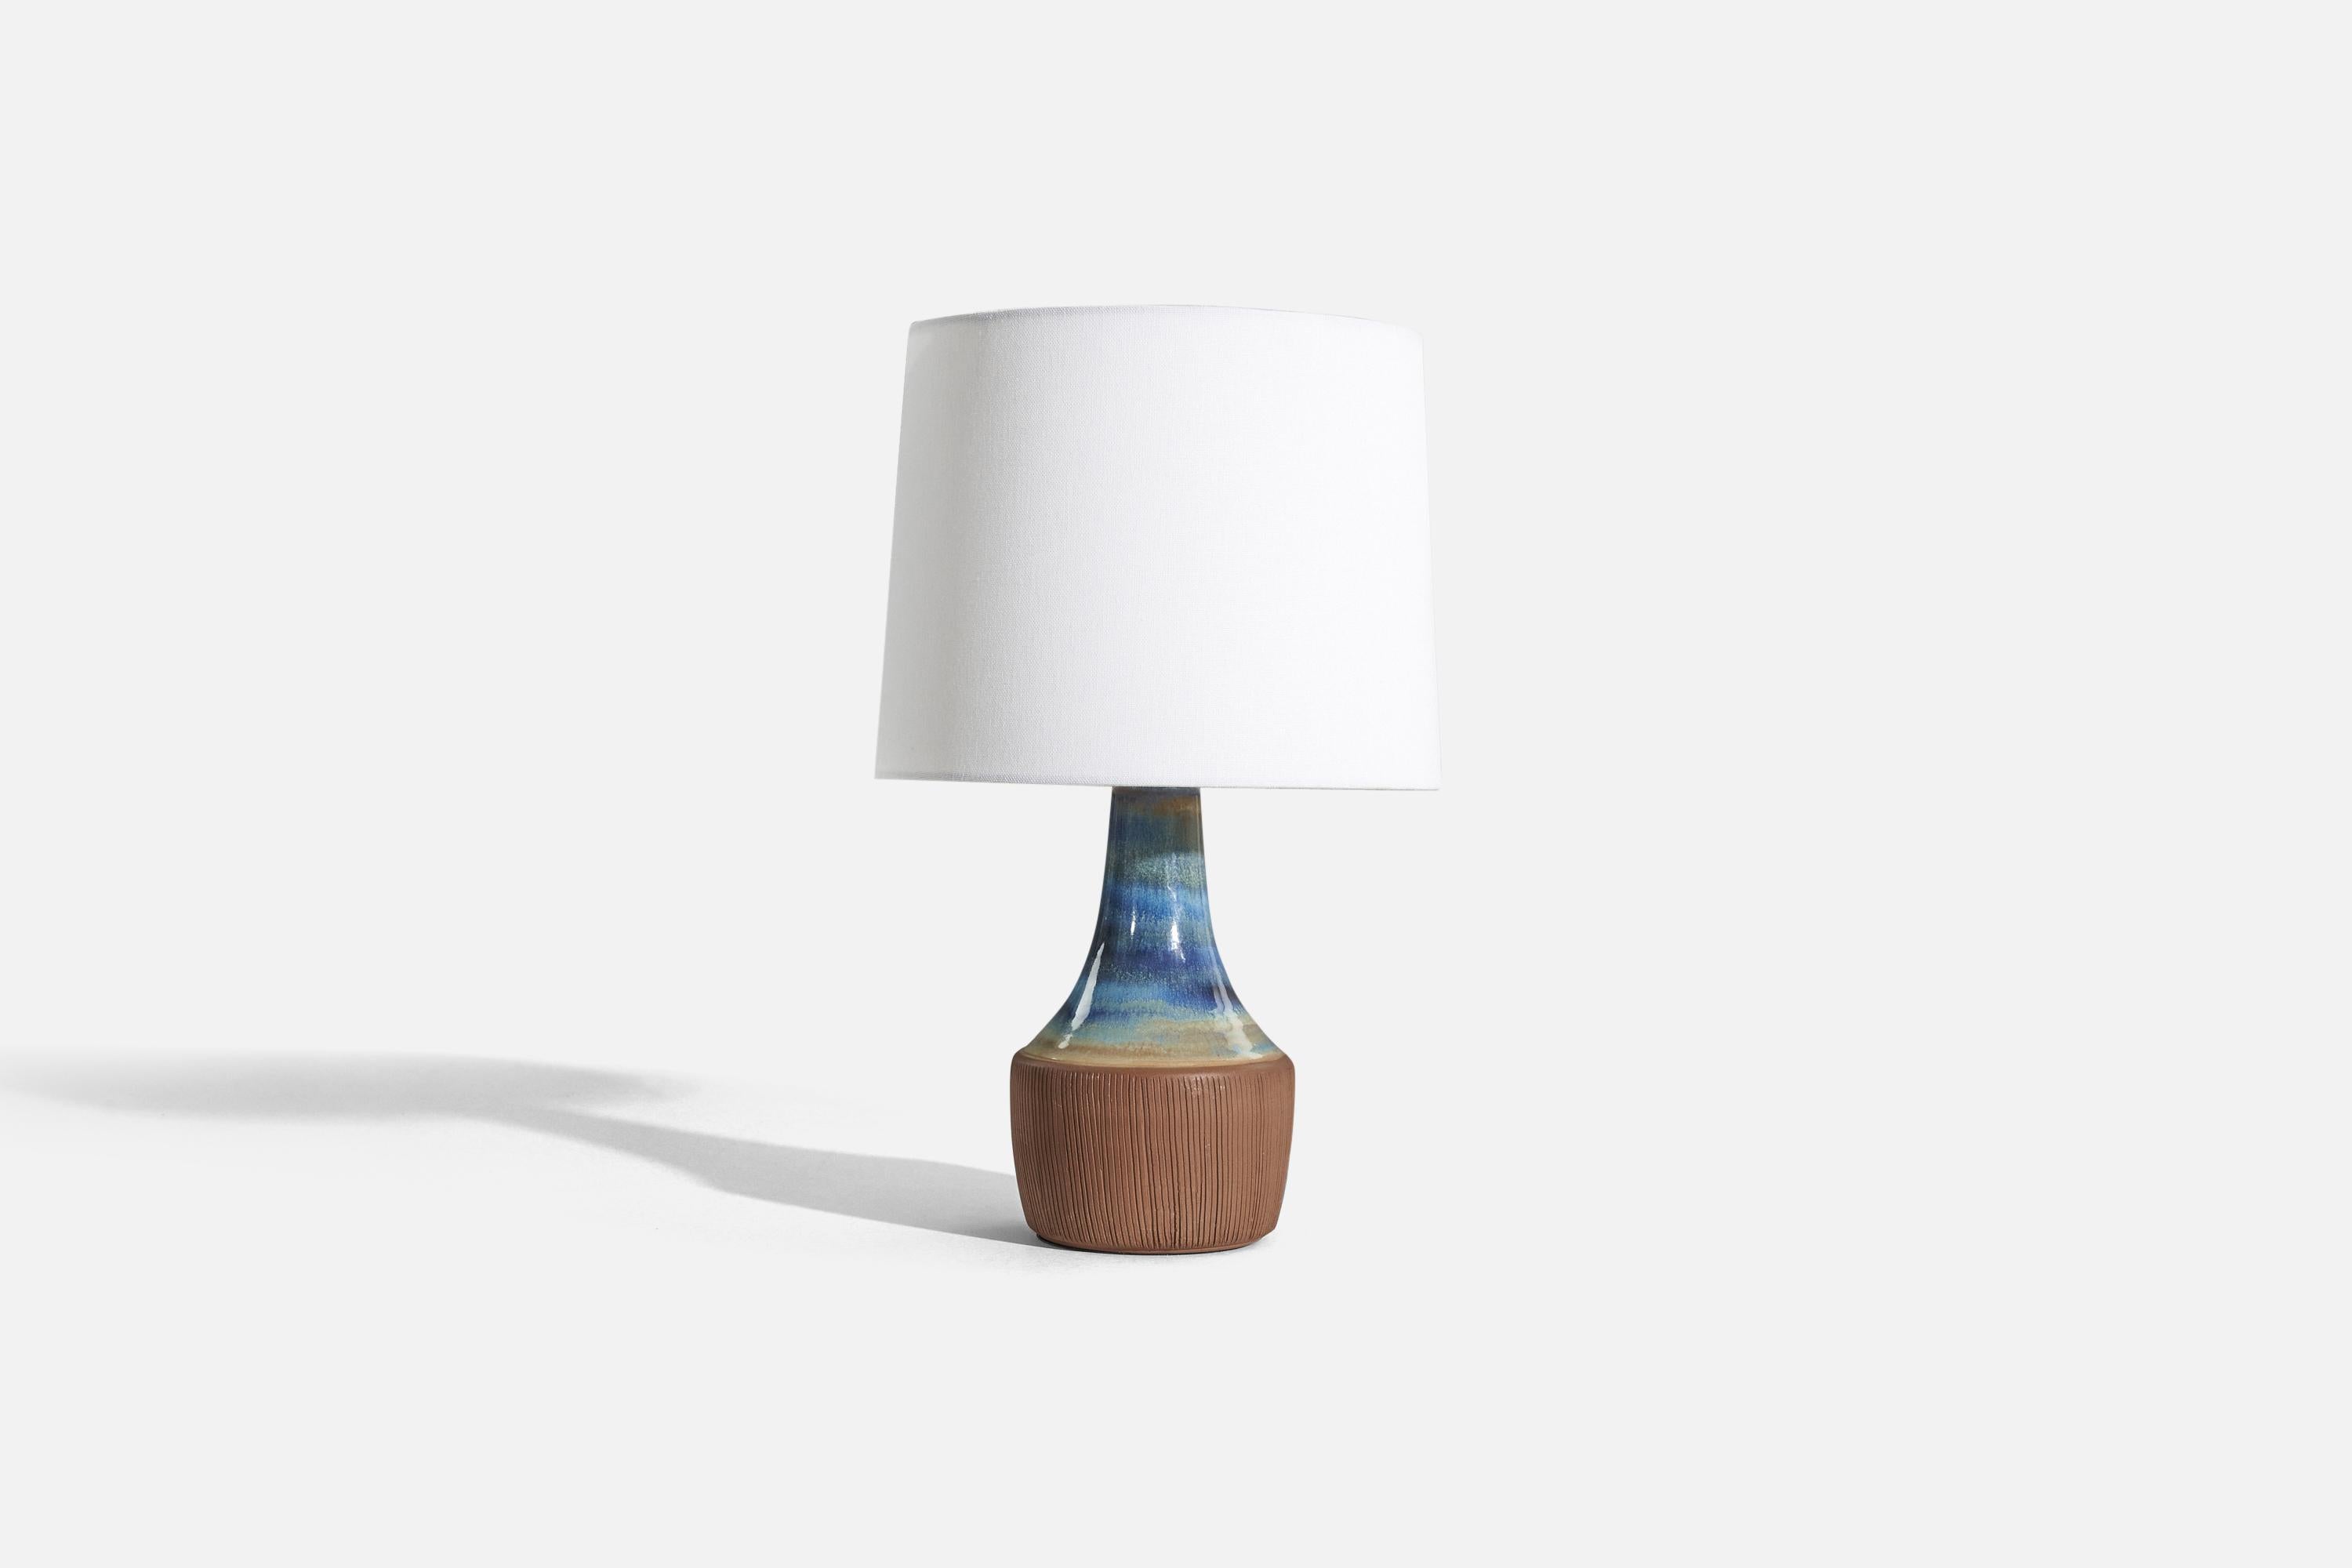 A blue and brown, glazed stoneware table lamp designed and produced by Michael Andersen Keramik, Bornholm, Denmark, 1960s. 

Sold without lampshade. 
Dimensions of Lamp (inches) : 12.625 x 5.125 x 5.125 (H x W x D)
Dimensions of Shade (inches) : 9 x